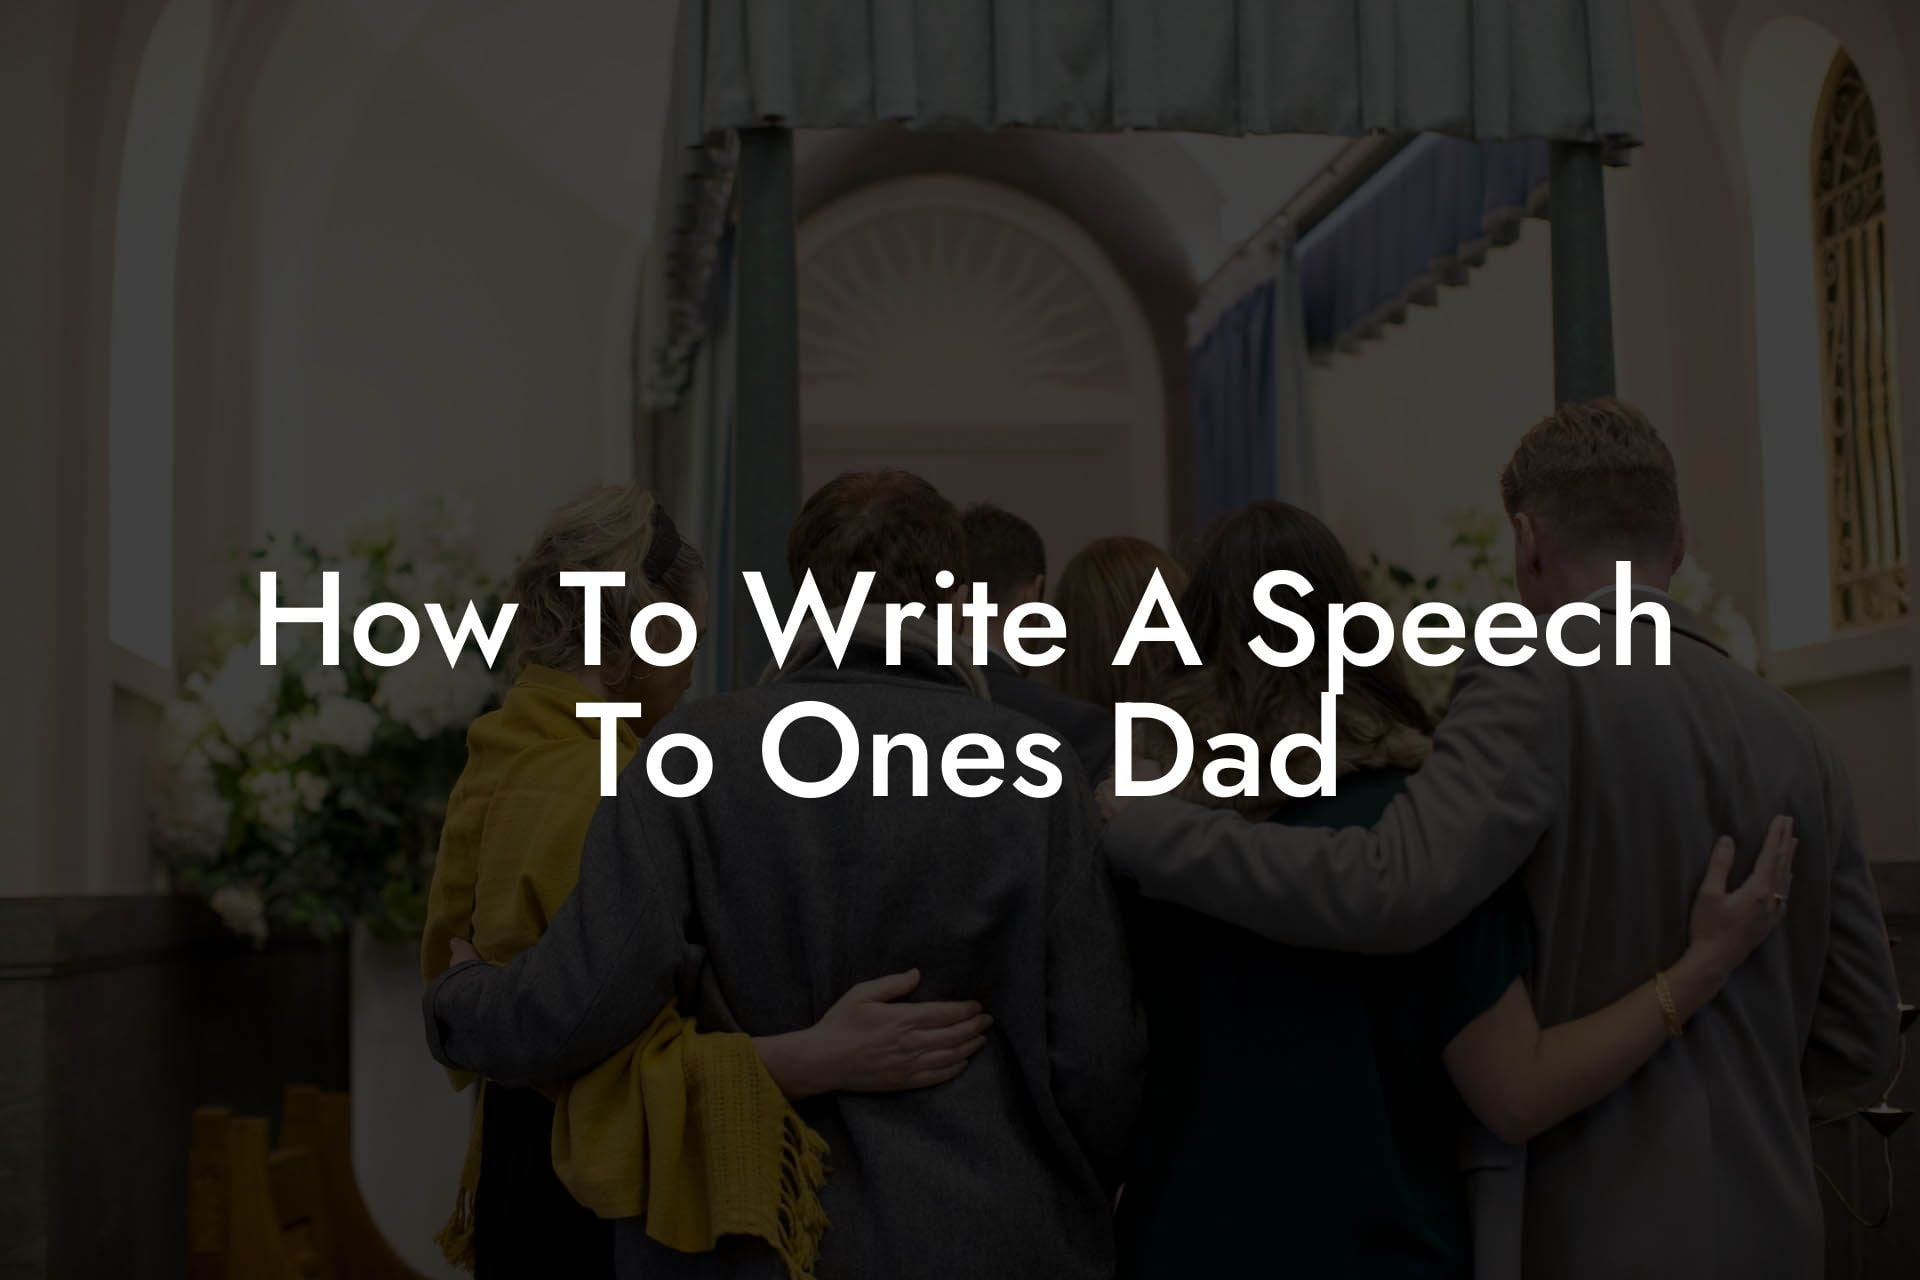 How To Write A Speech To Ones Dad